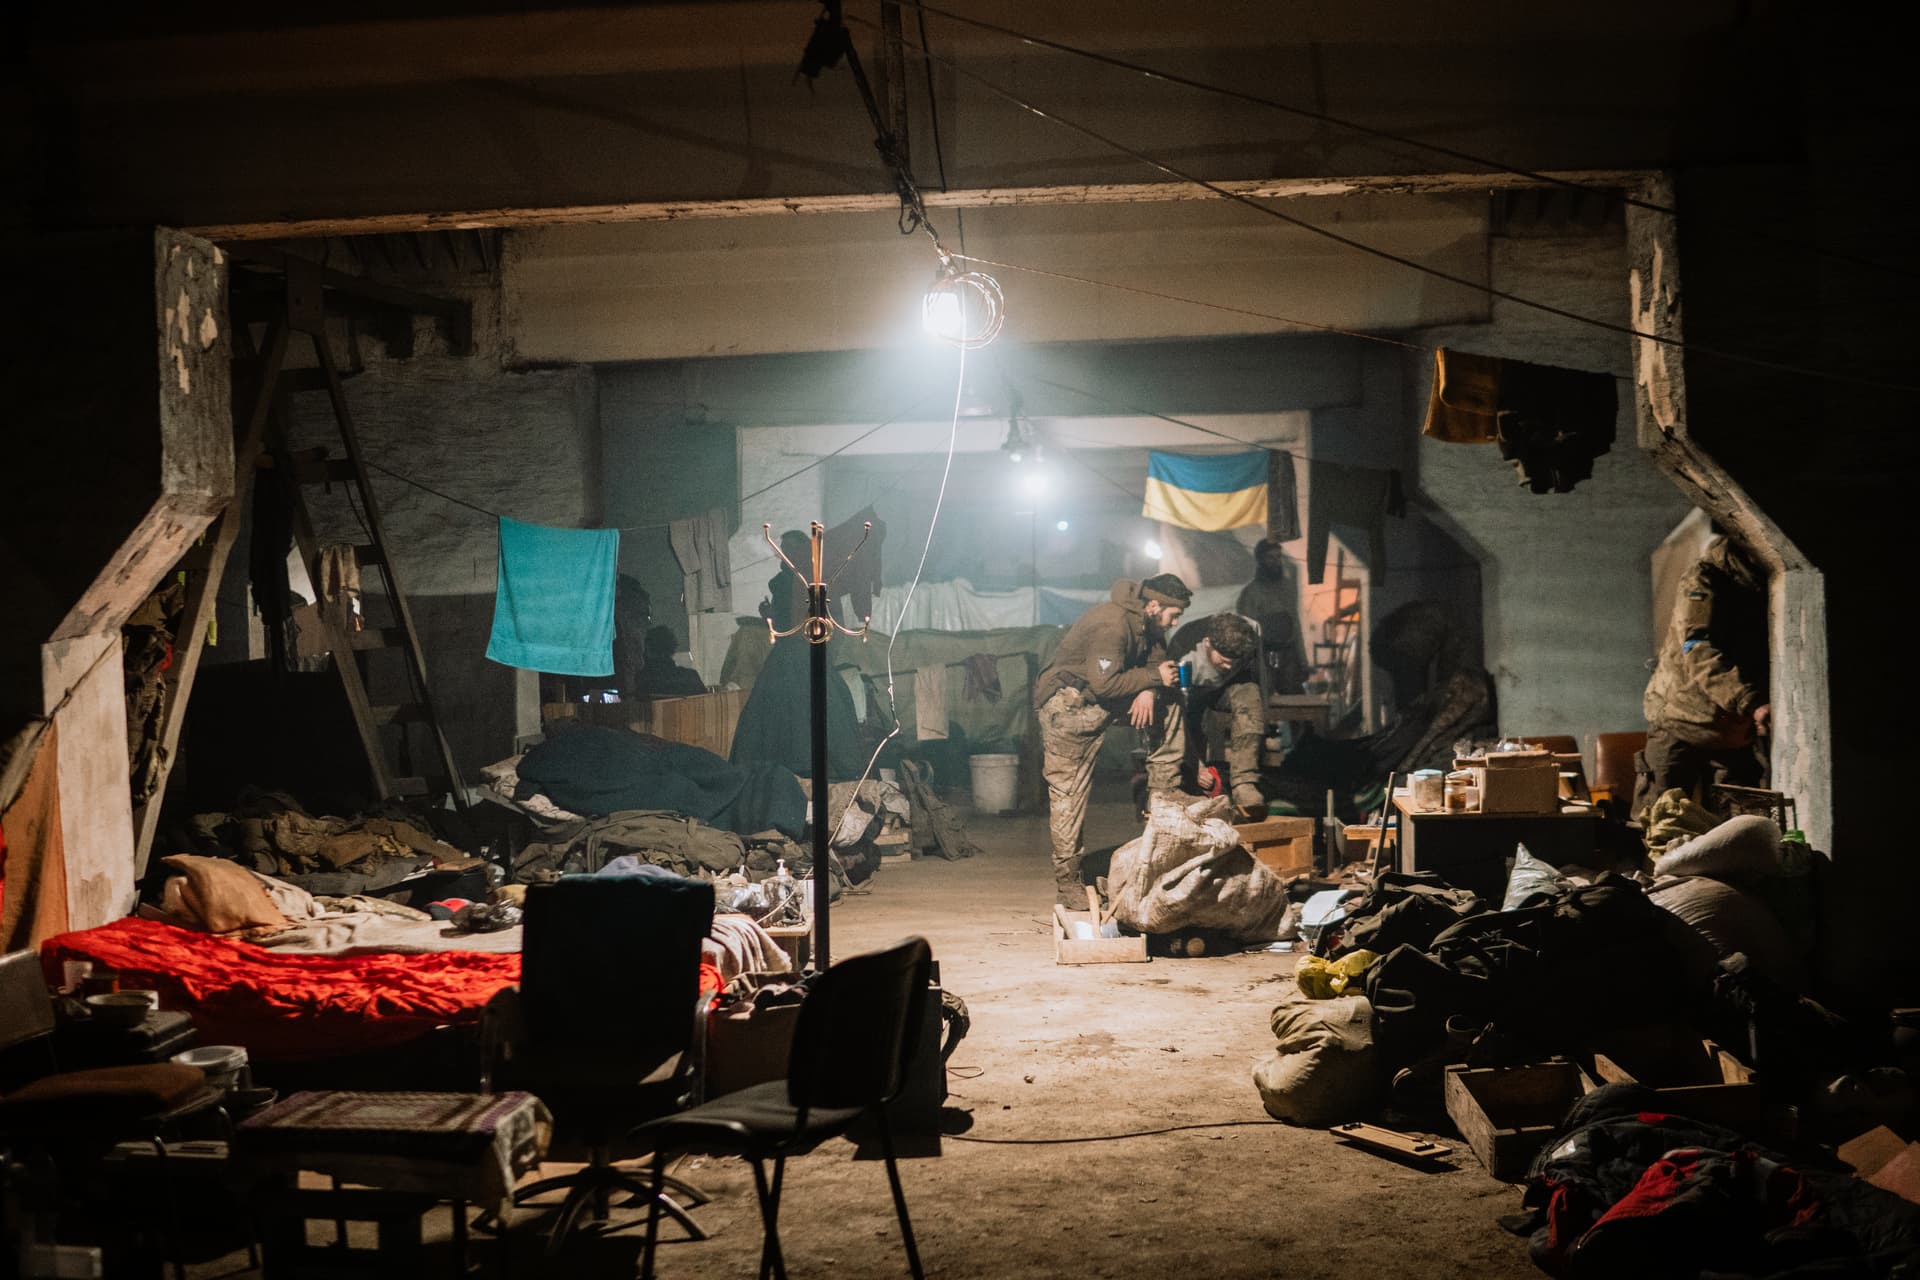 Ukrainian soldiers inside the ruined Azovstal steel plant in their shelter in Mariupol